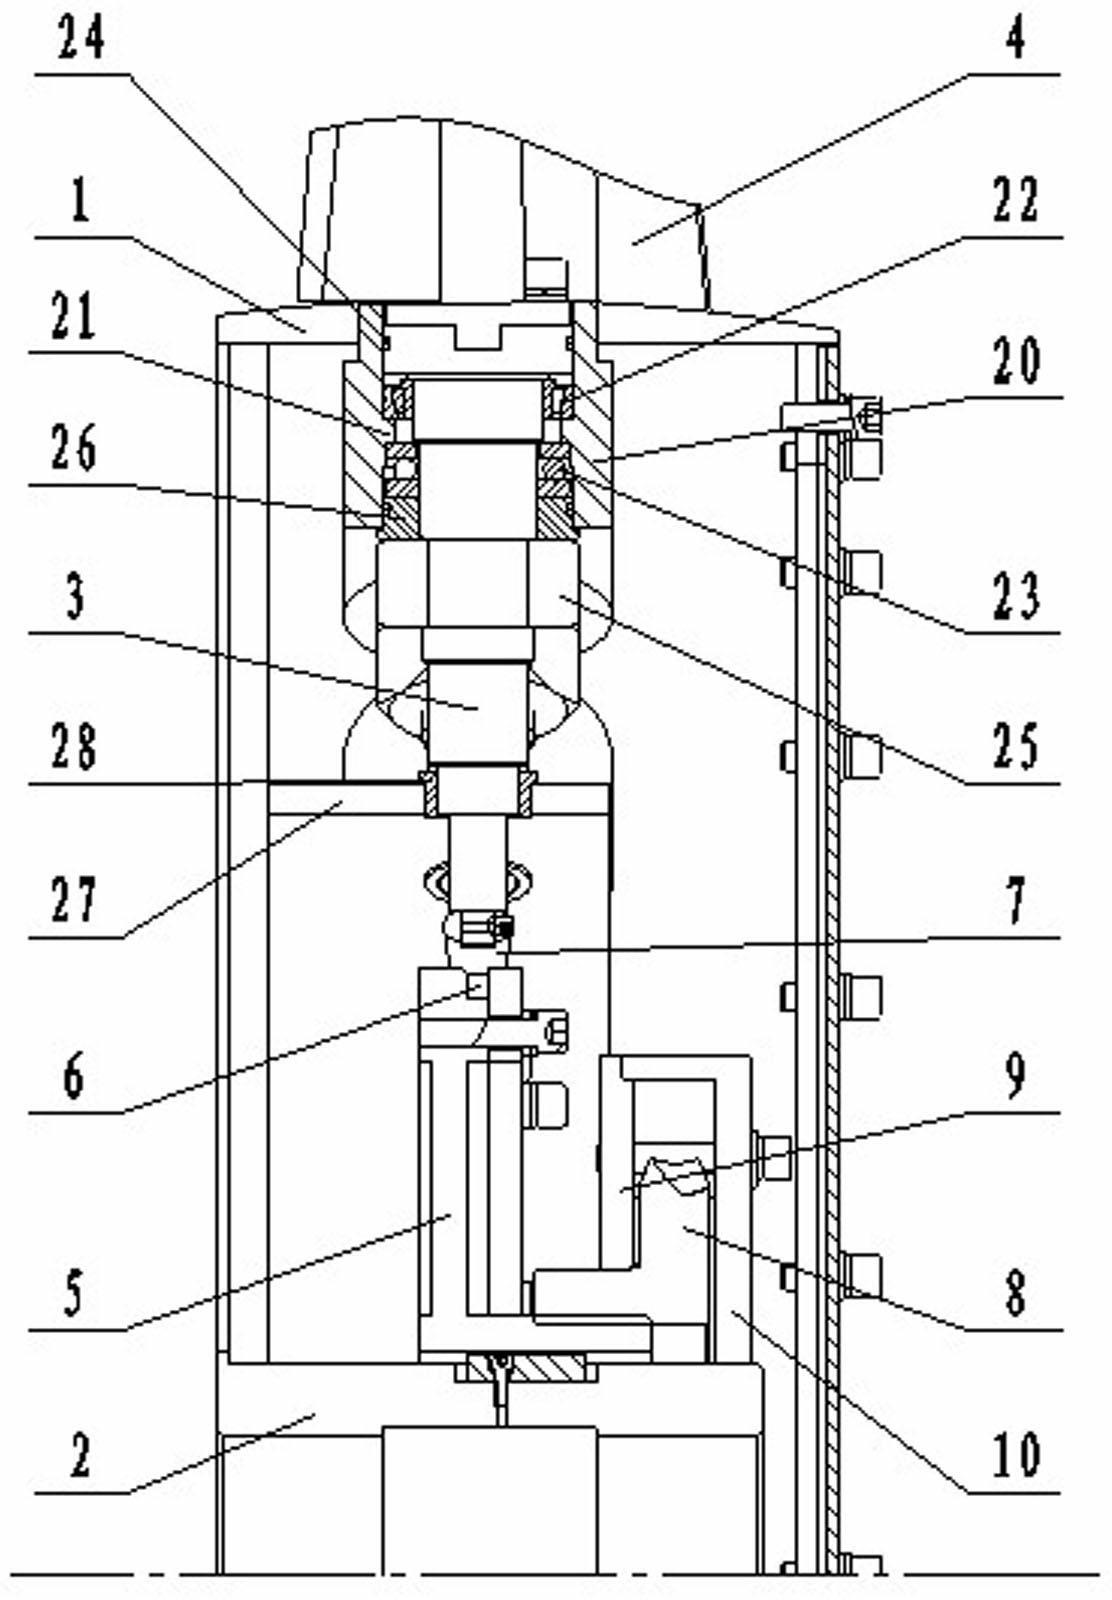 Axial flow ventilator capable of synchronously adjusting blades